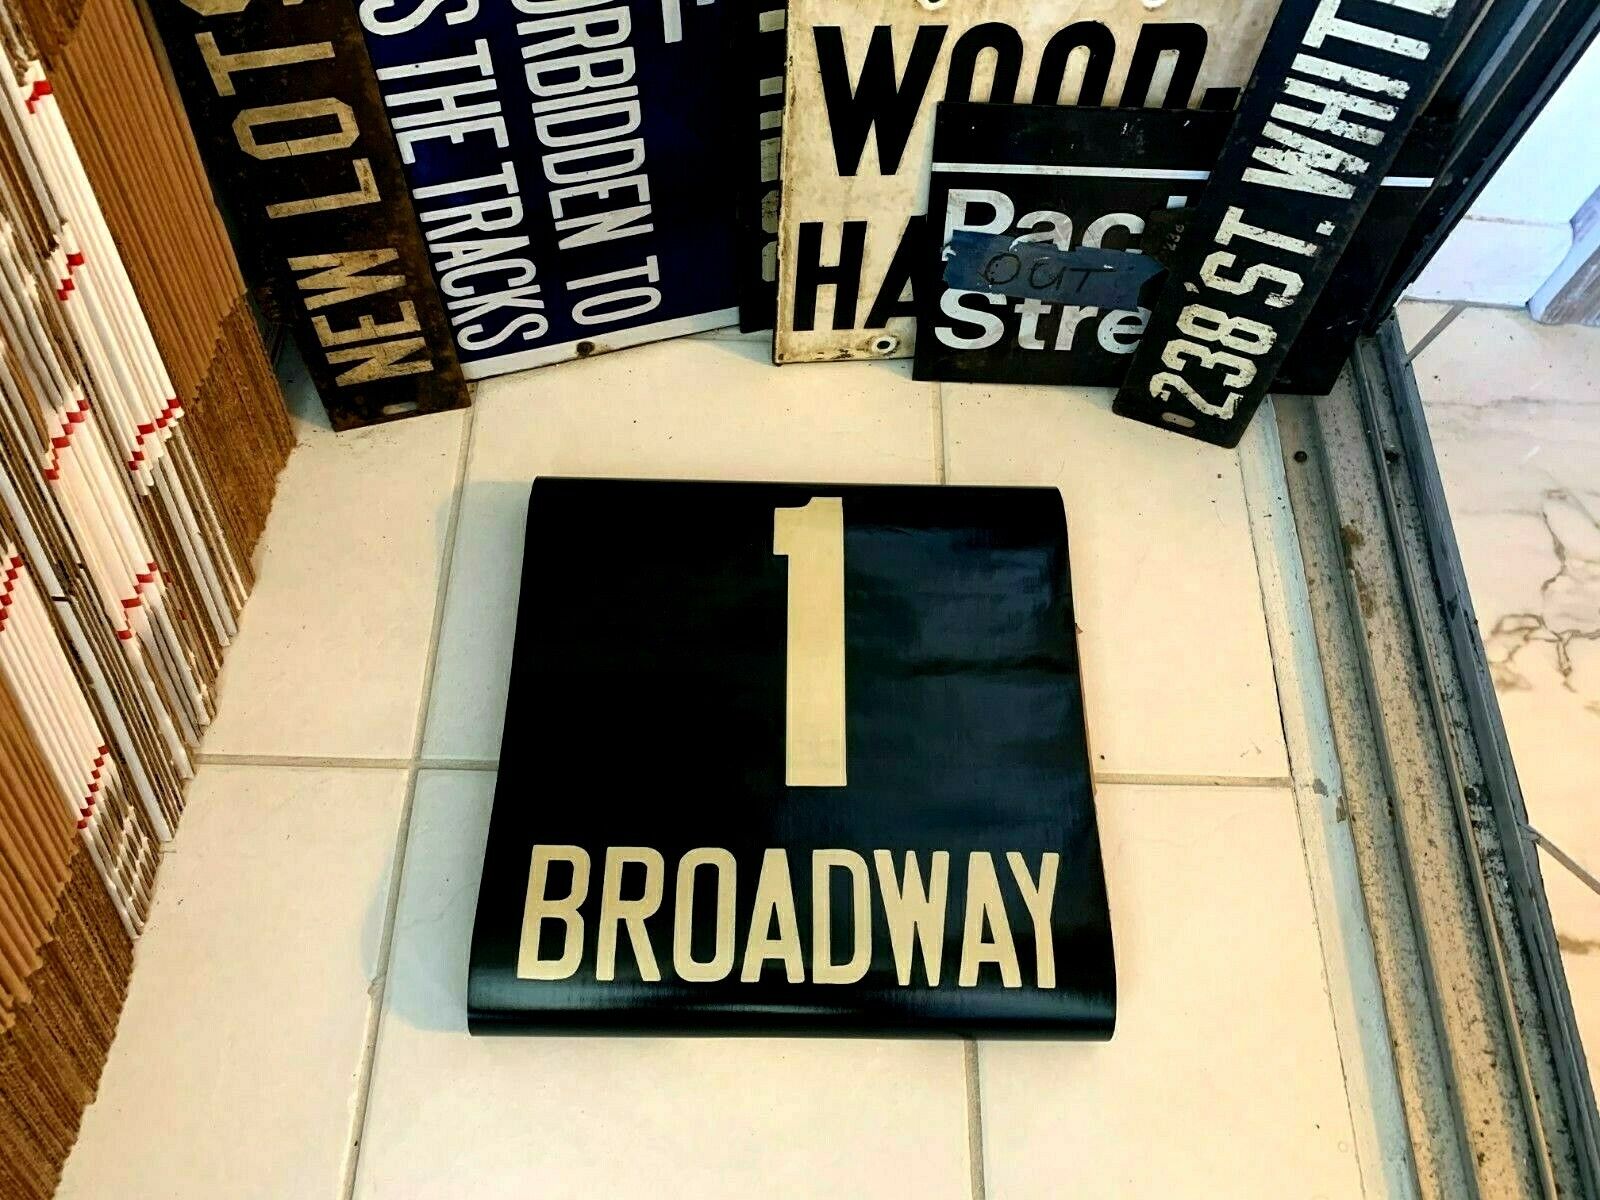 1961 NYC NY SUBWAY ROLL SIGN #1 LINE BROADWAY CHAMBERS SOUTH FERRY BEGAN 1904